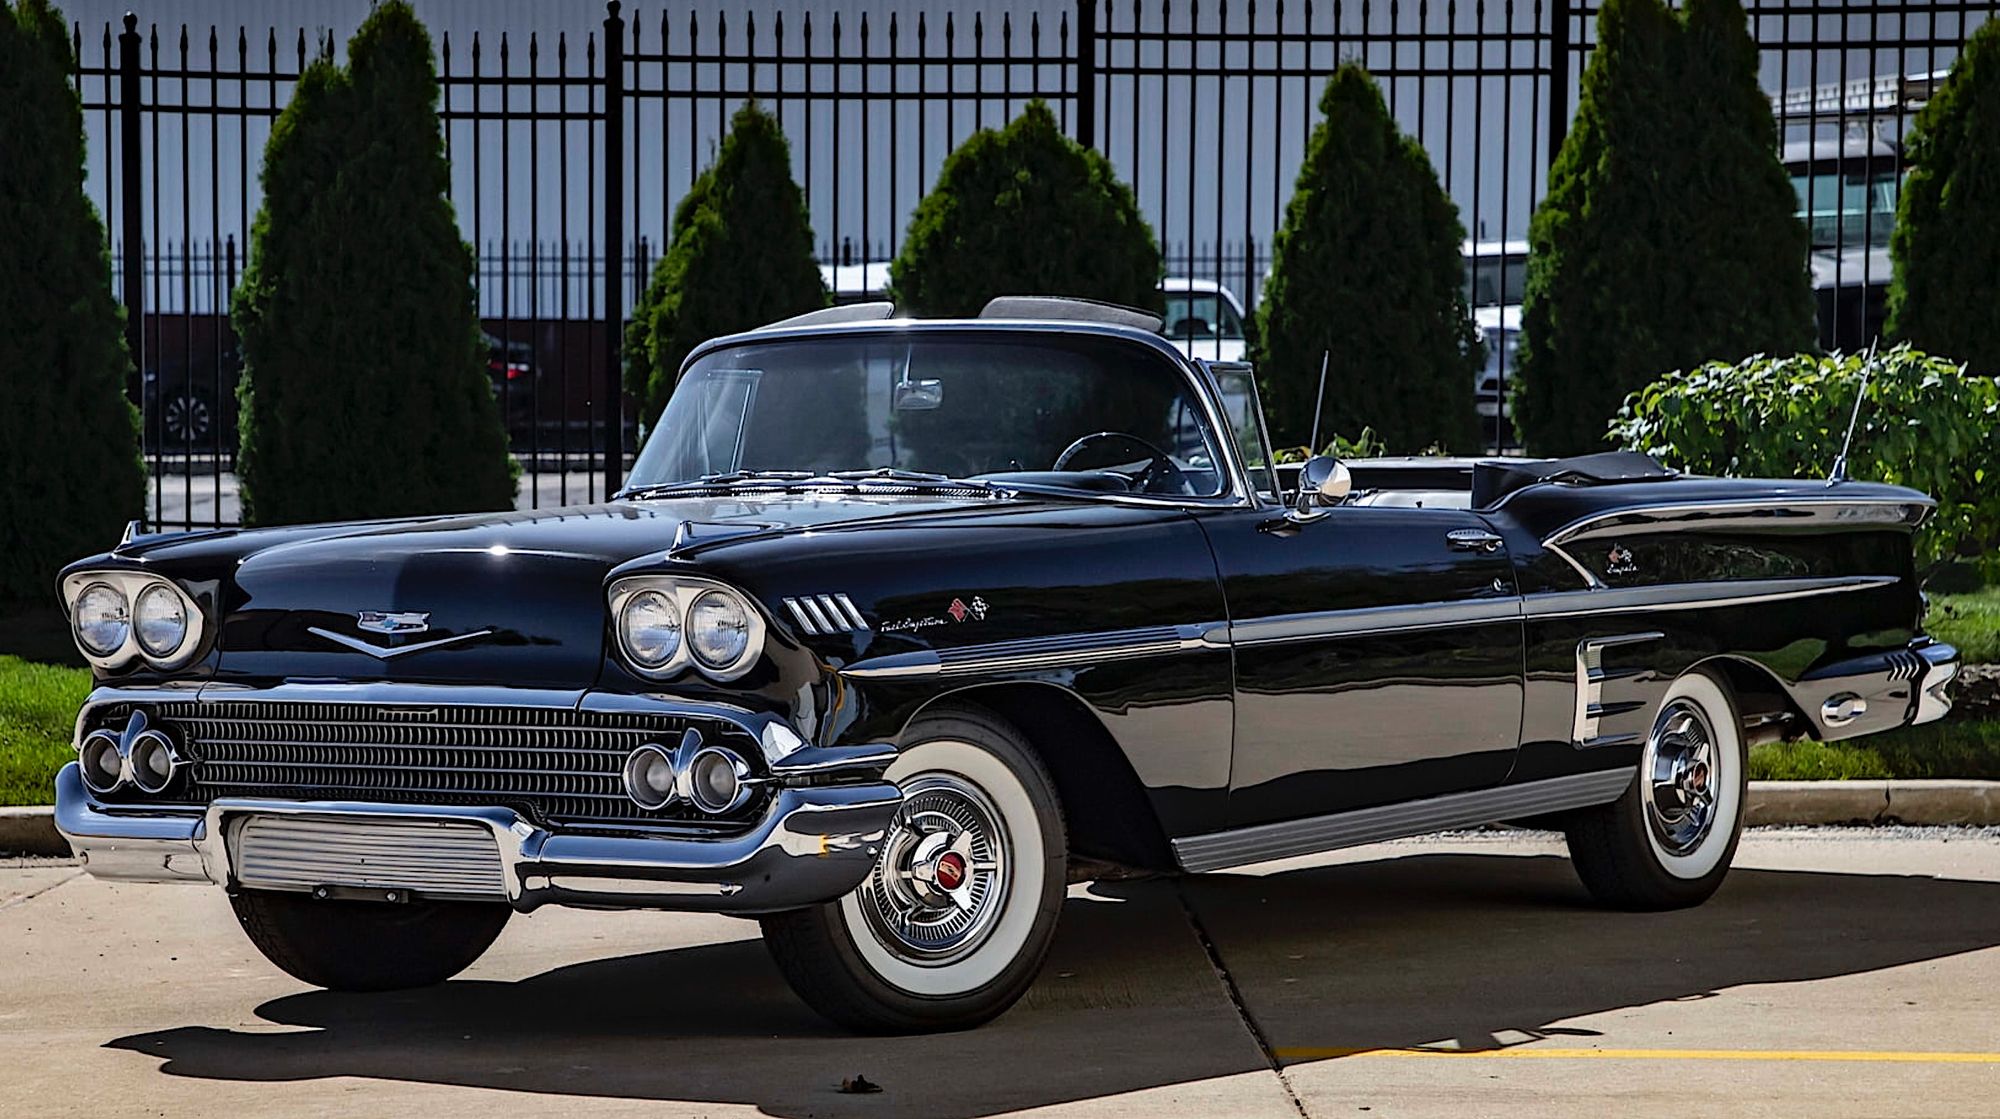 The Most Collectible Chevy Impalas Ever Made